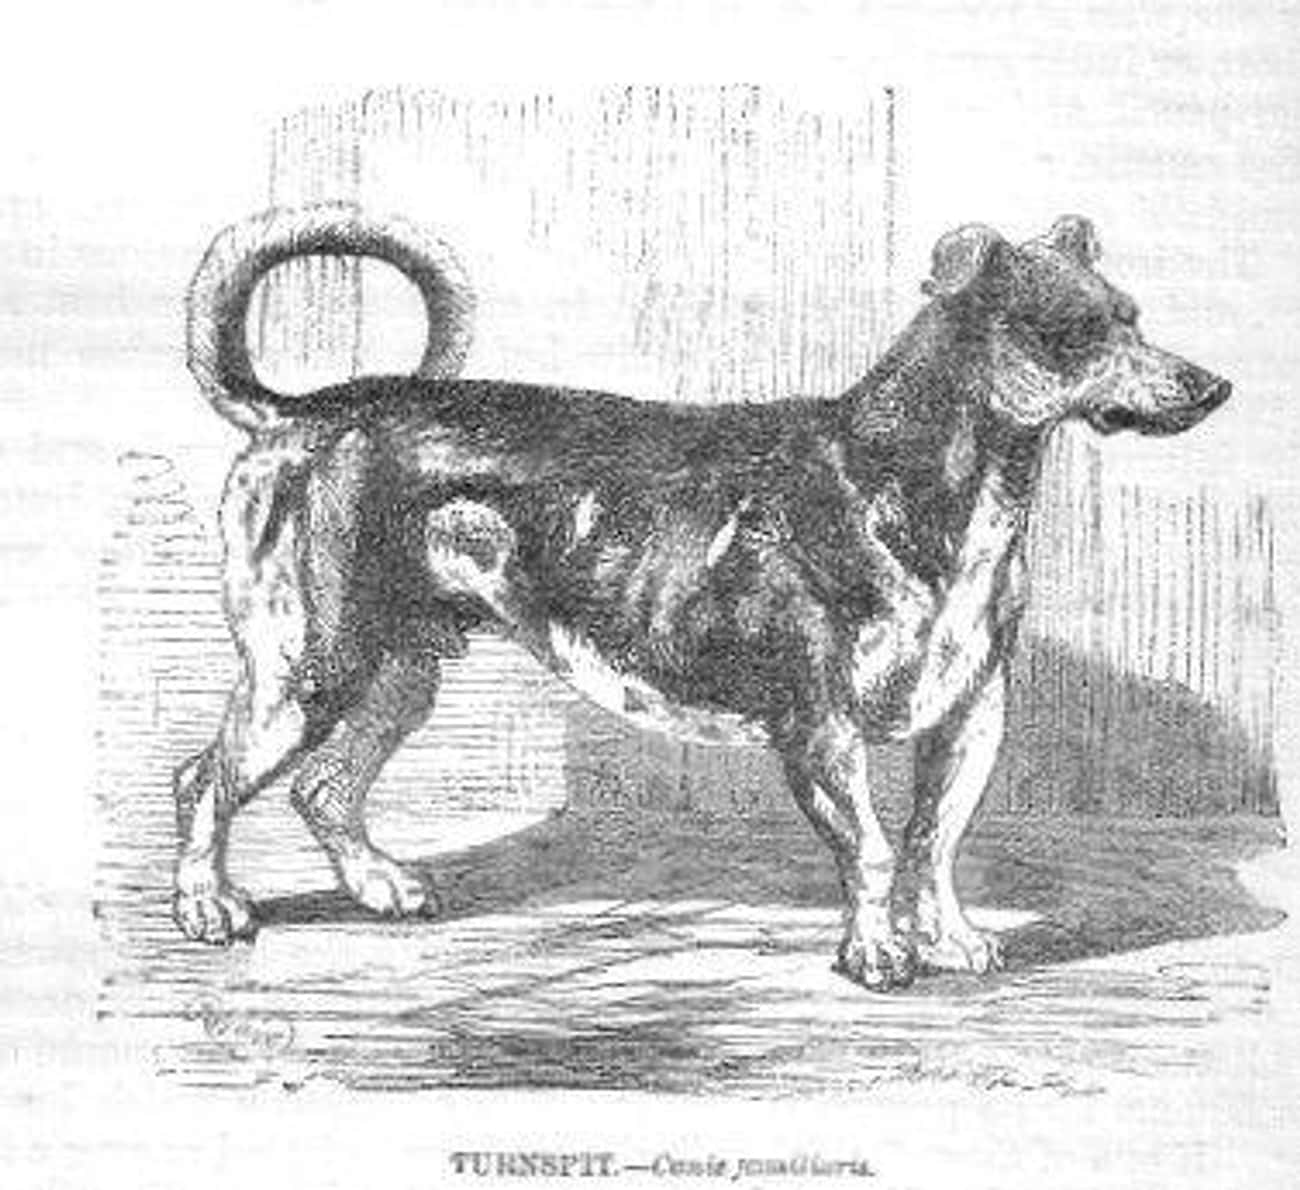 Turnspit Dogs Looked "Suspicious" And "Unhappy"